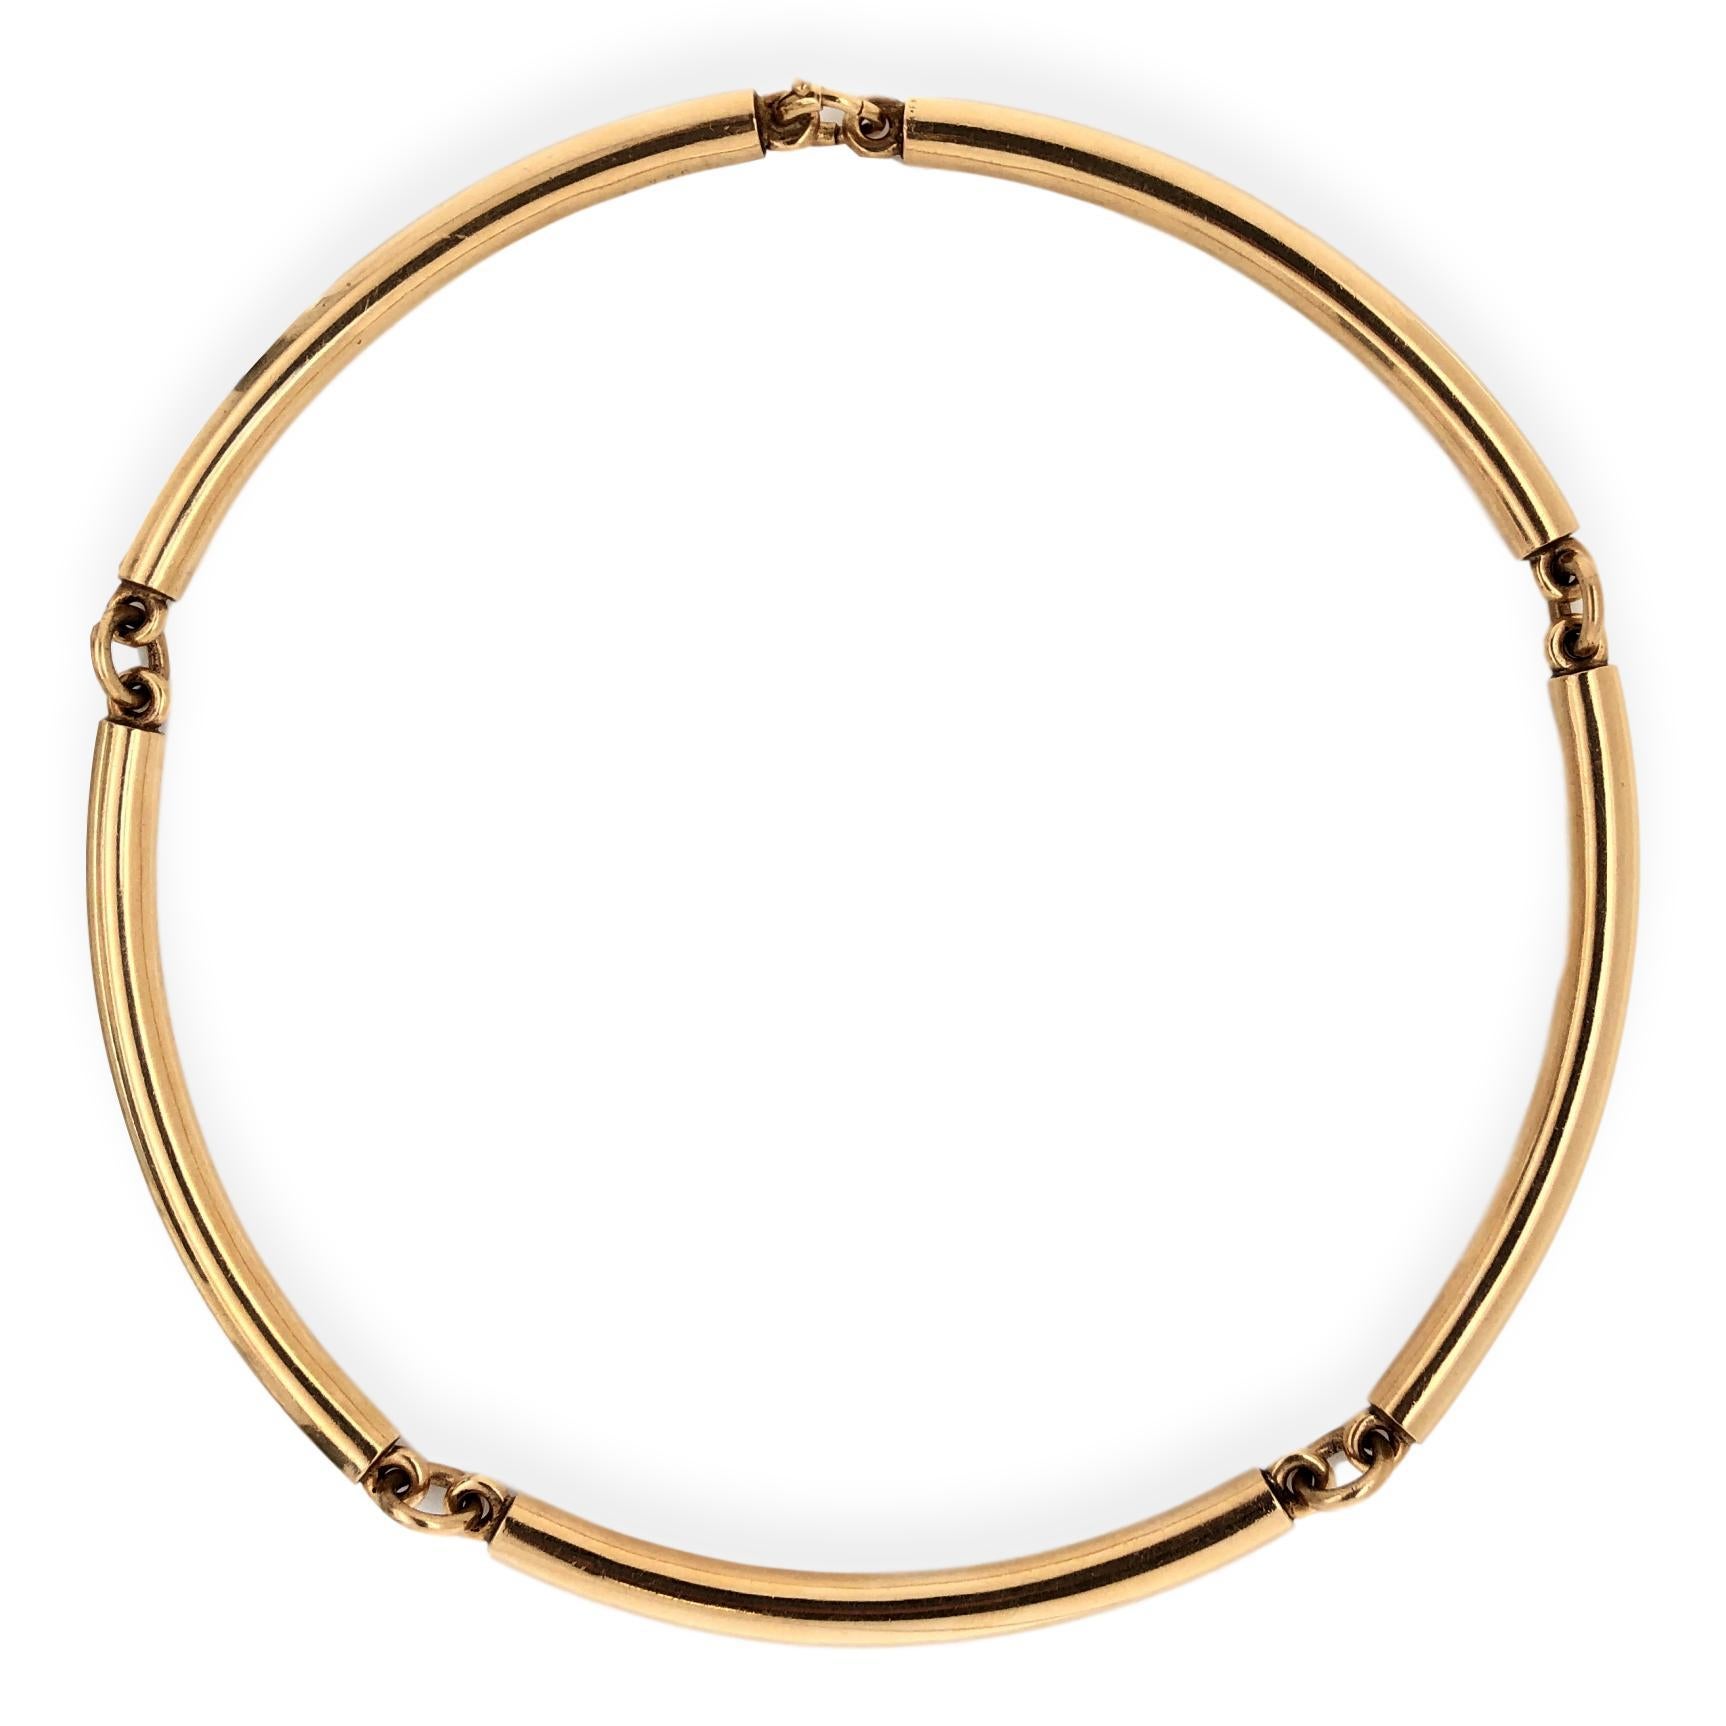 Articulated Choker necklace by Van Cleef and Arpels. The 14k 3/16